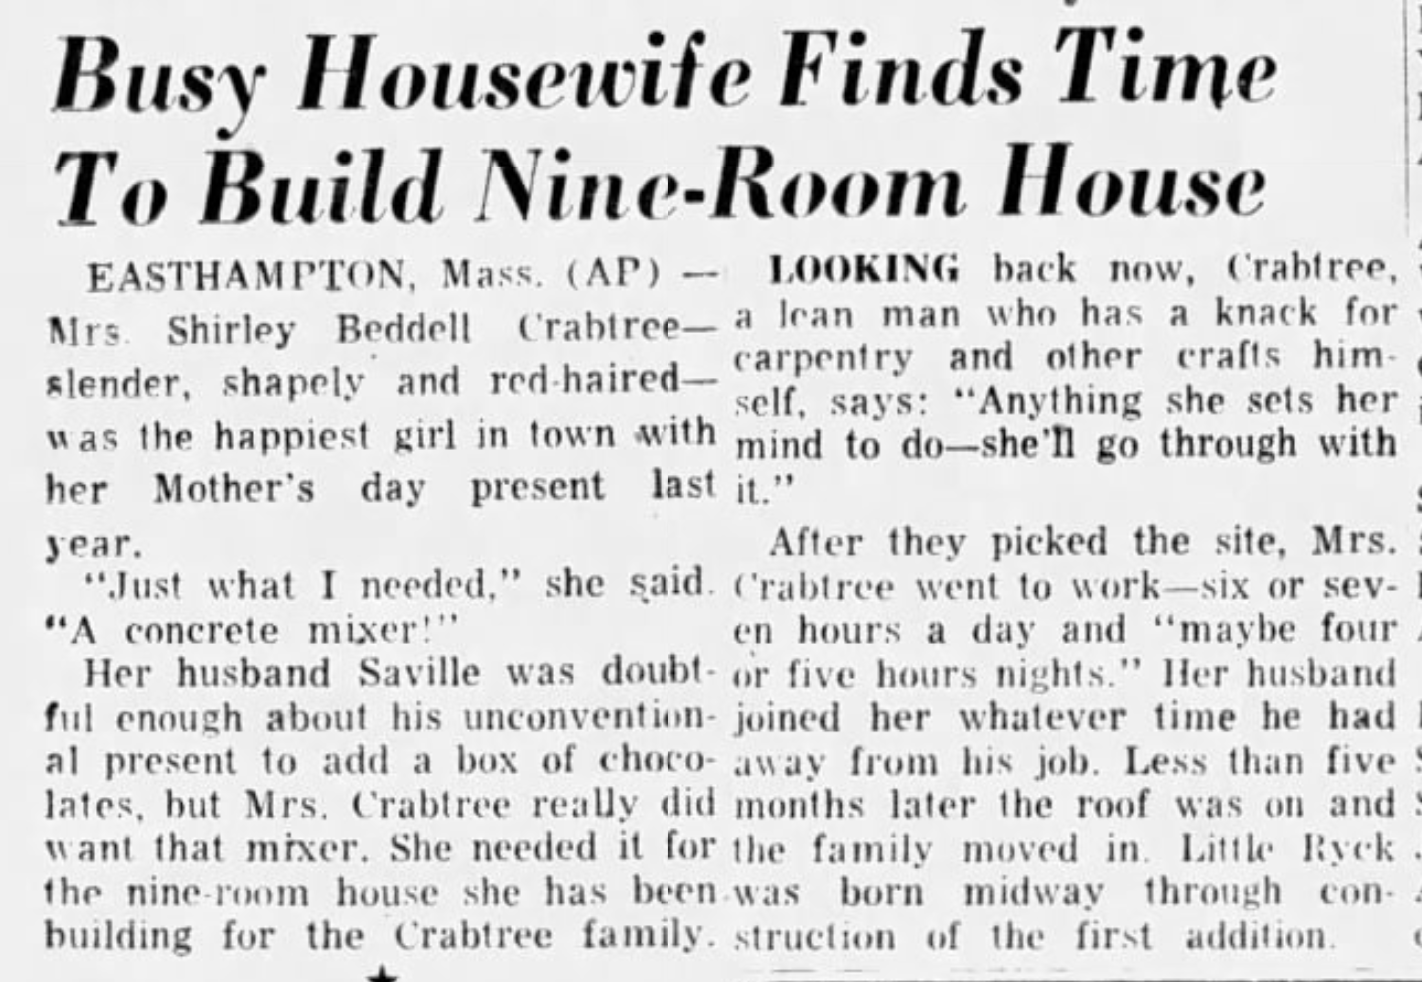 Busy Housewife Finds Time To Build Nine-Room House: Mrs. Shirley Beddell Crabtree was thrilled with her Mother's day present last year. "Just what I needed," she said. "A concrete mixer!"